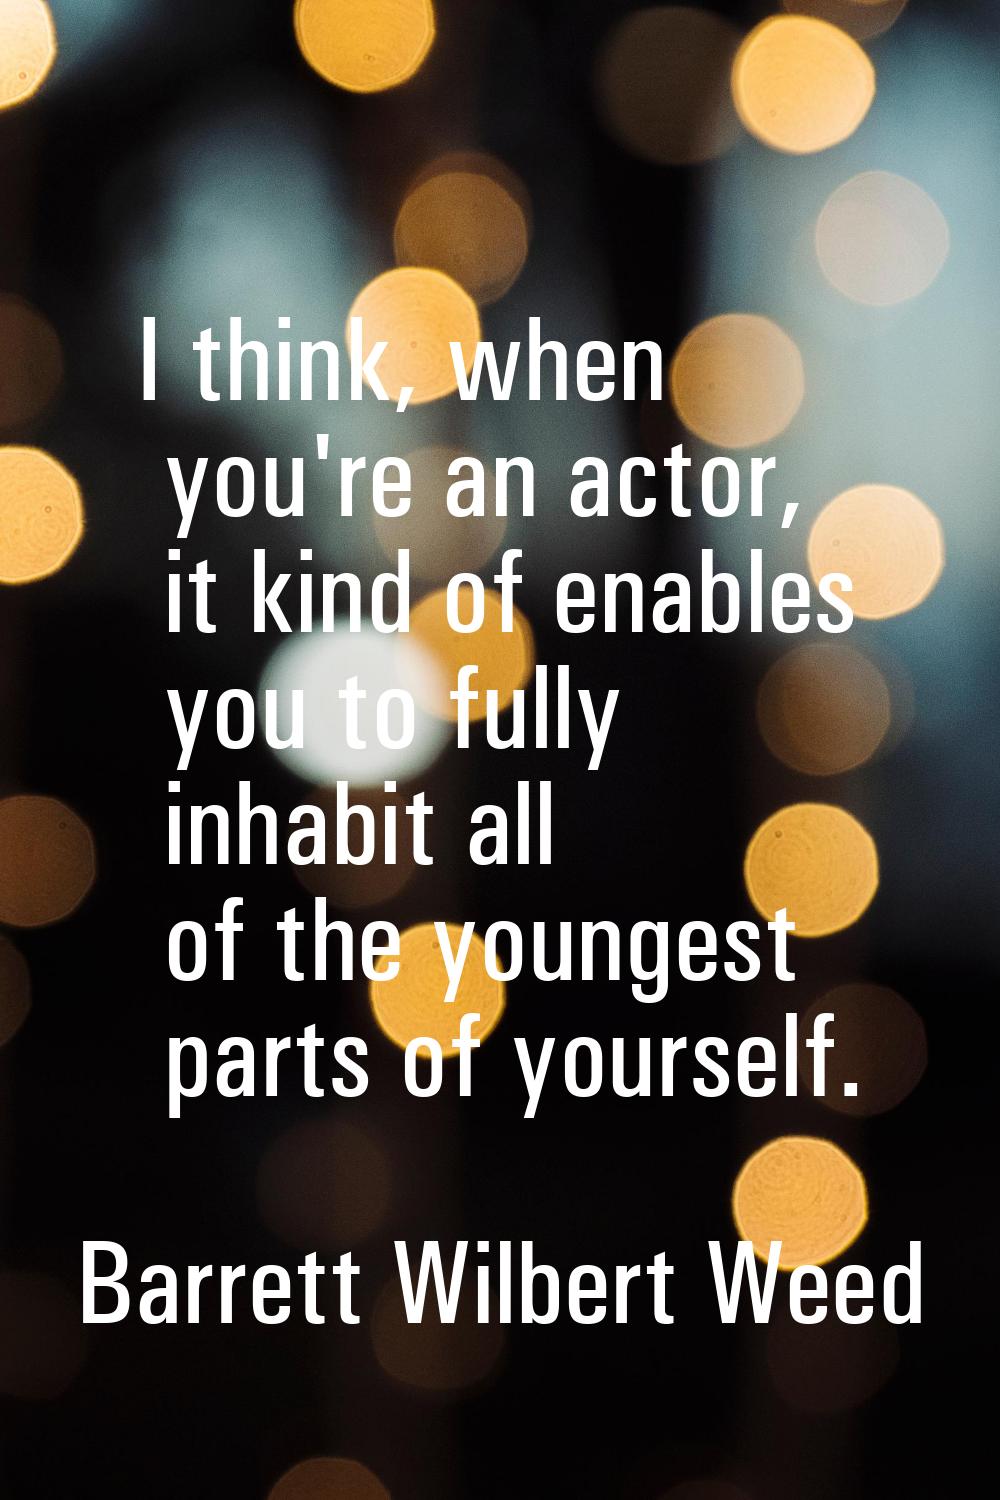 I think, when you're an actor, it kind of enables you to fully inhabit all of the youngest parts of